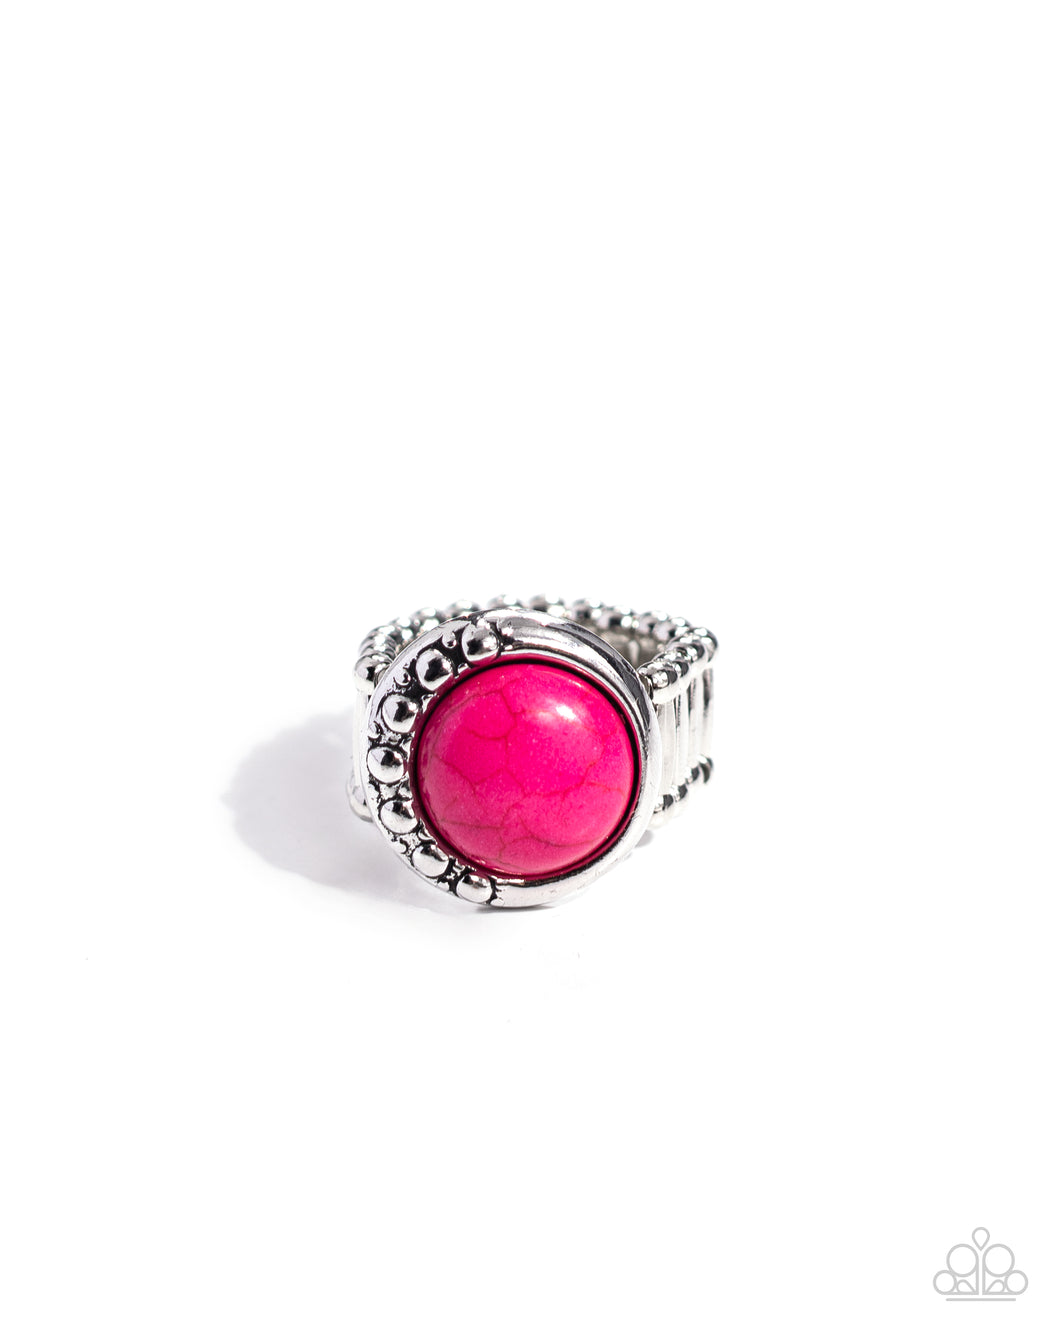 Rural Route - Pink Ring - Paparazzi - Dare2bdazzlin N Jewelry